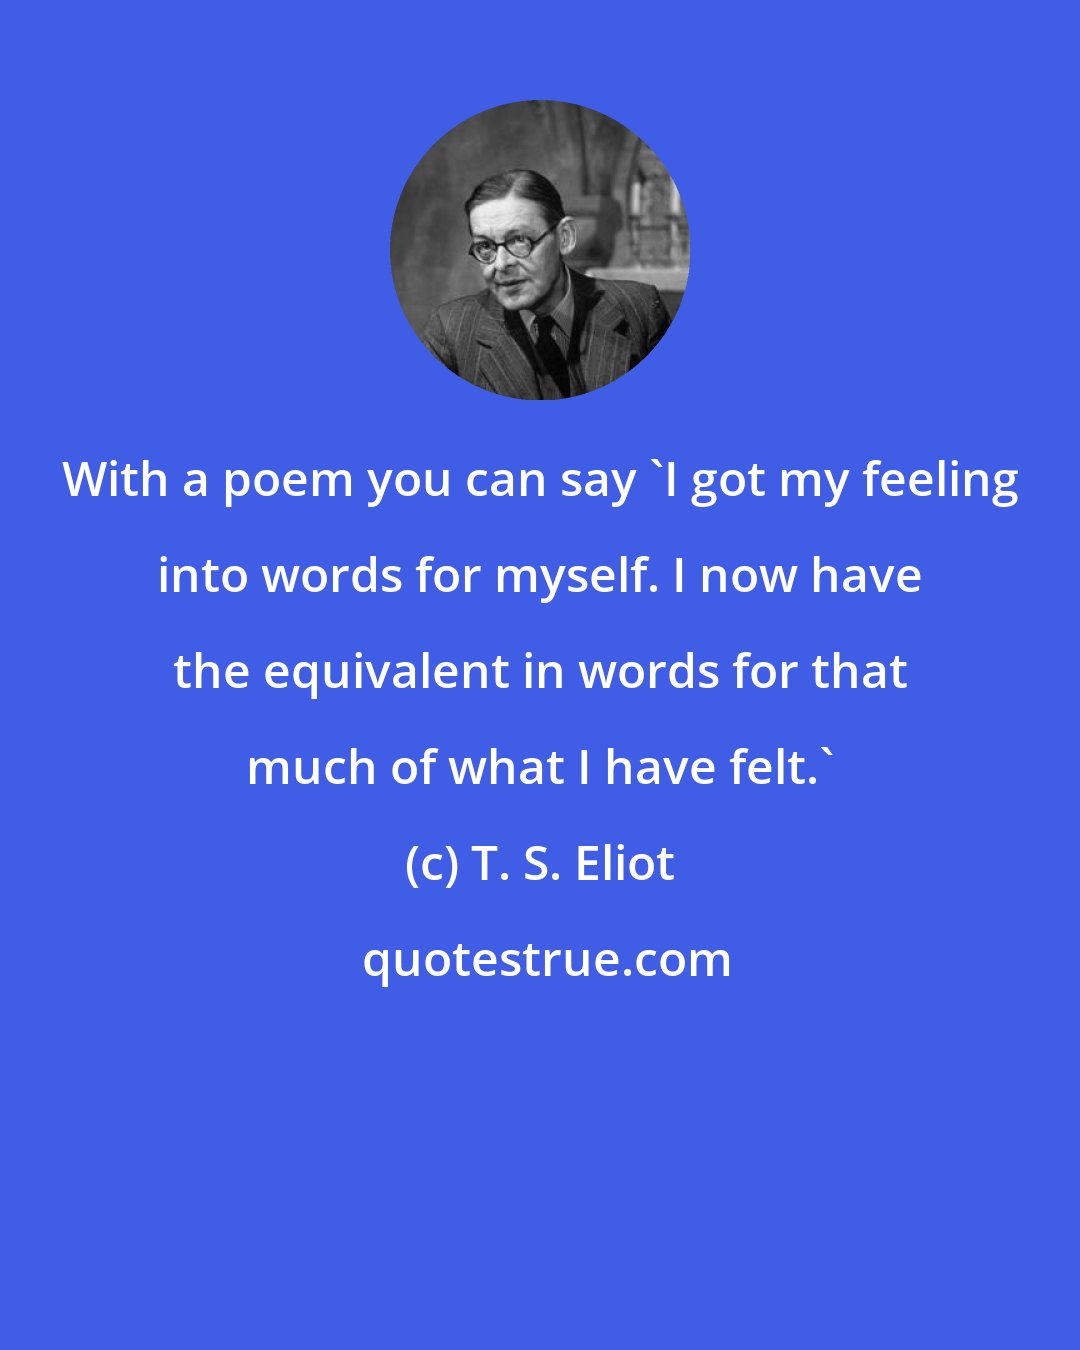 T. S. Eliot: With a poem you can say 'I got my feeling into words for myself. I now have the equivalent in words for that much of what I have felt.'